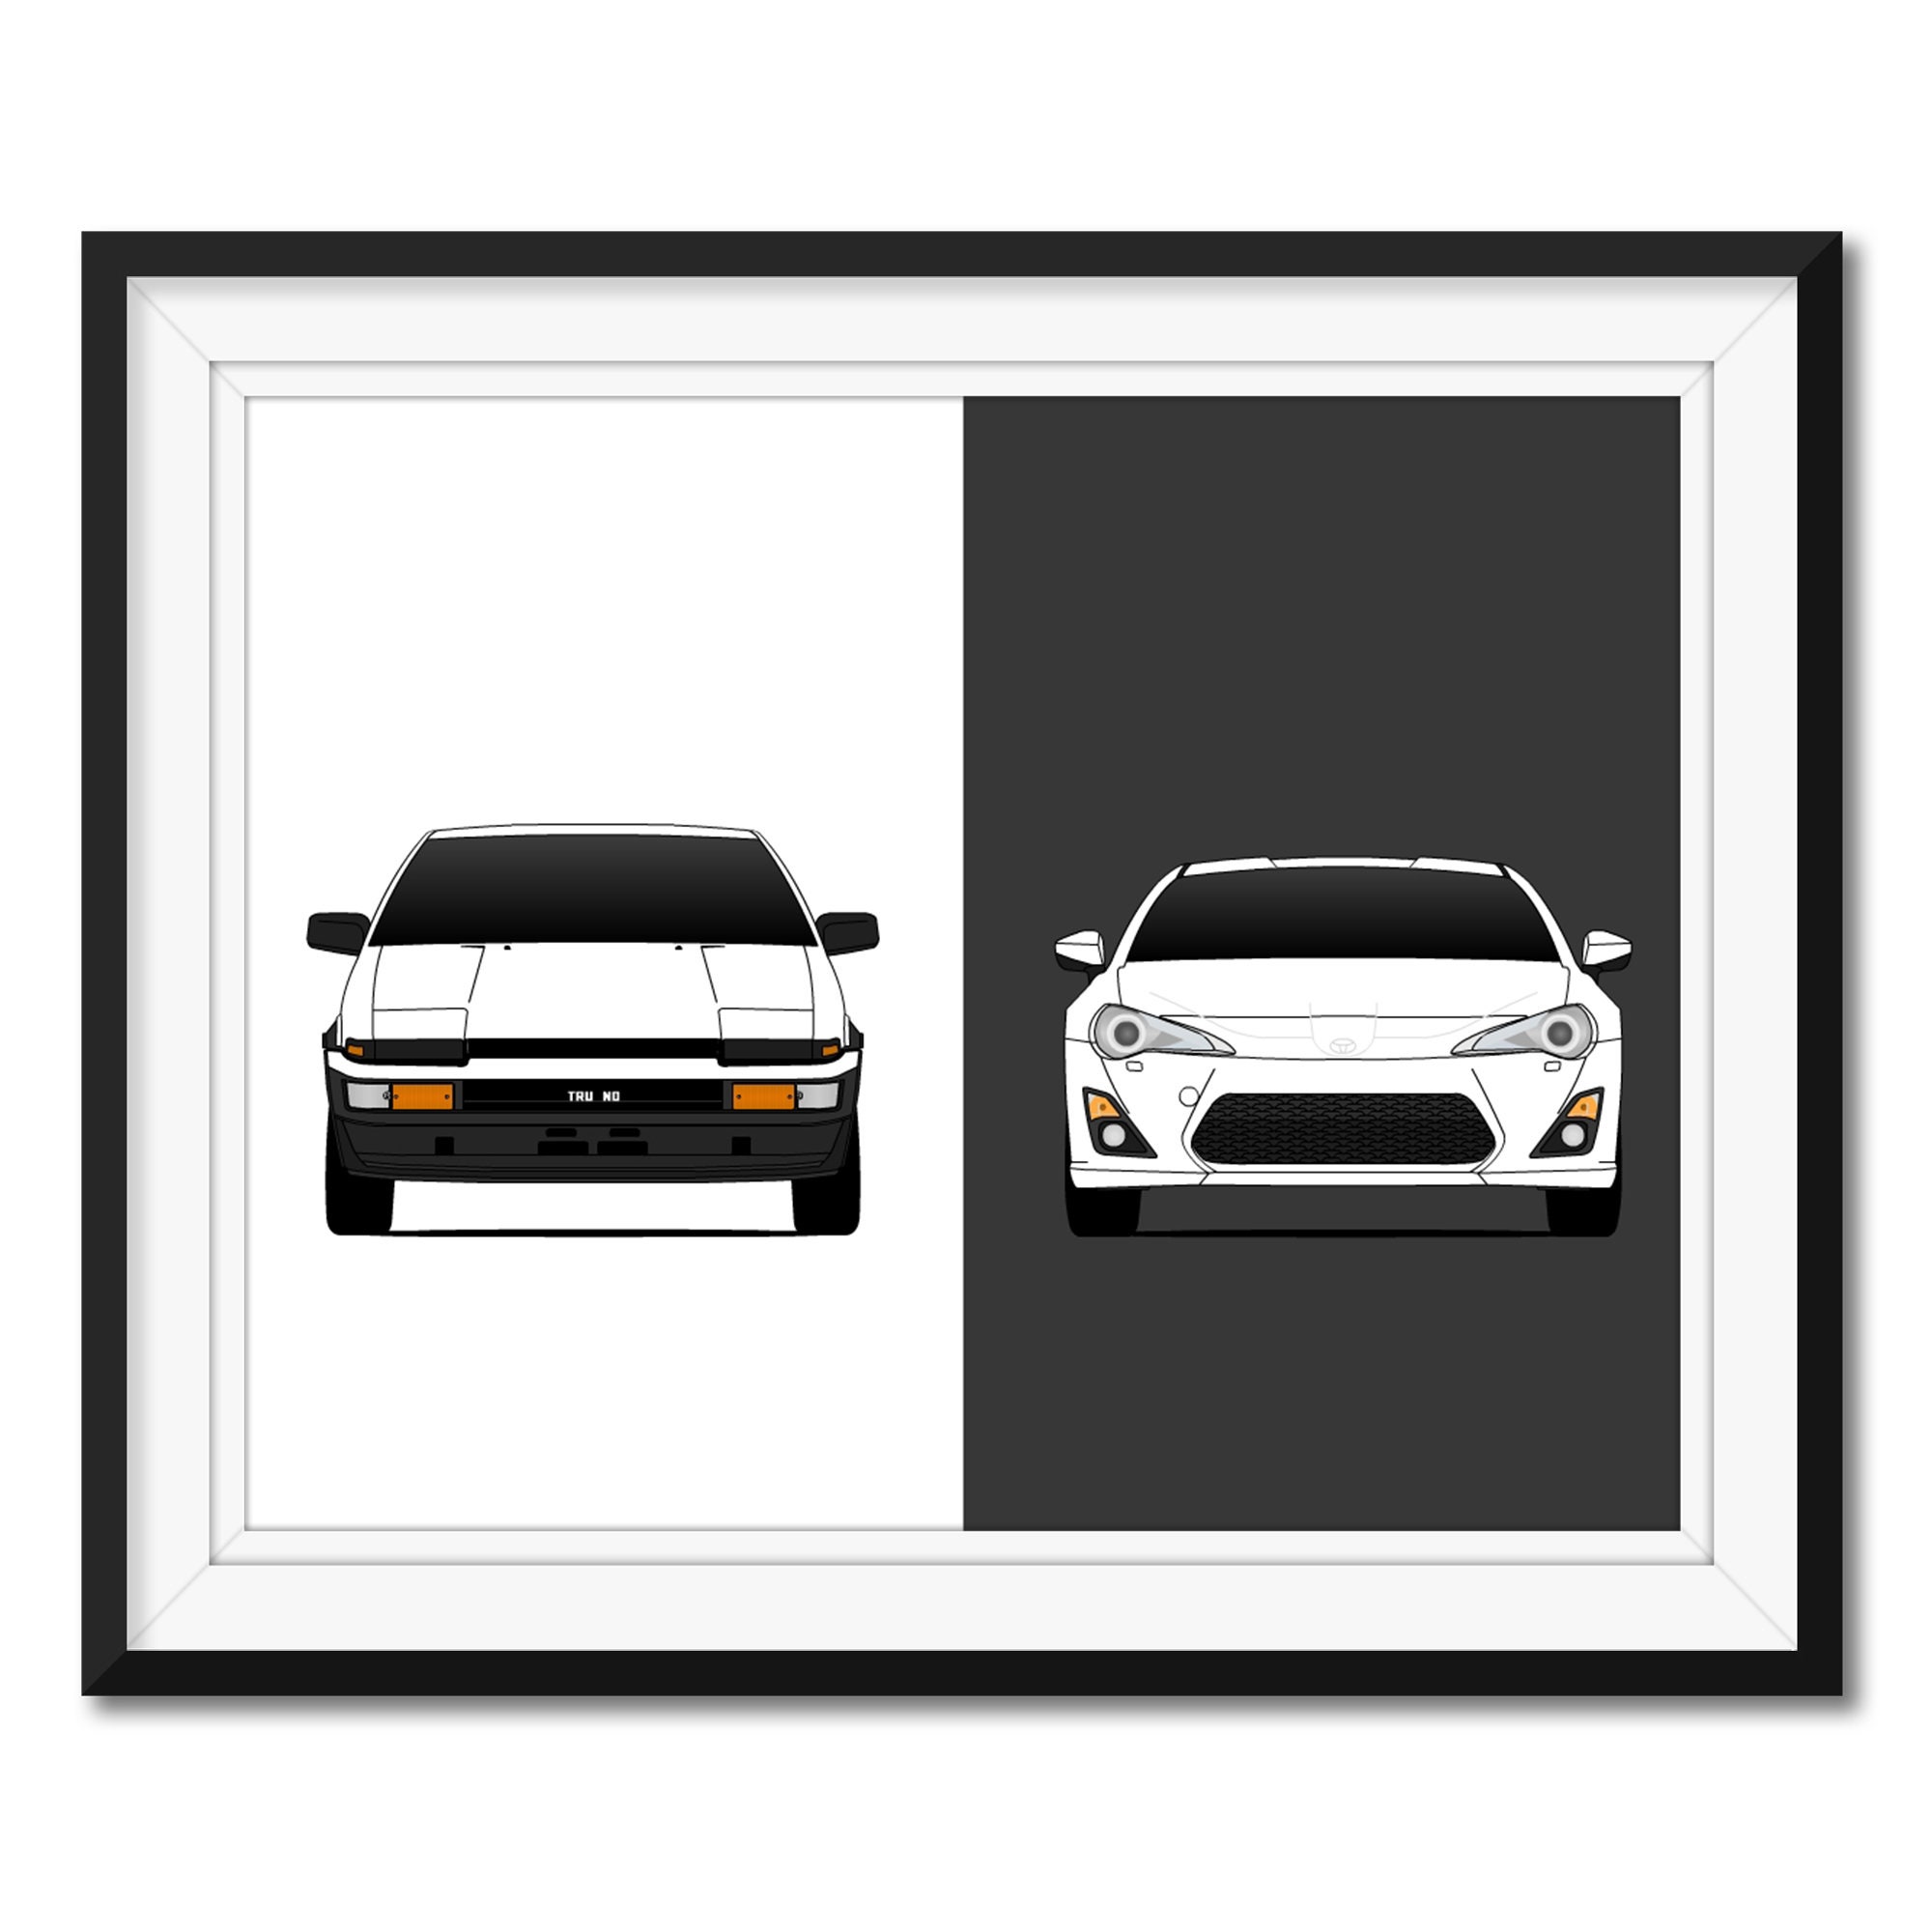 Toyota AE86 Generations Car Poster Toyota 86 Car Poster 86 History GT86,  FT86, FRS, Trueno, Corolla, Sprinter, Levin BX1 unframed 